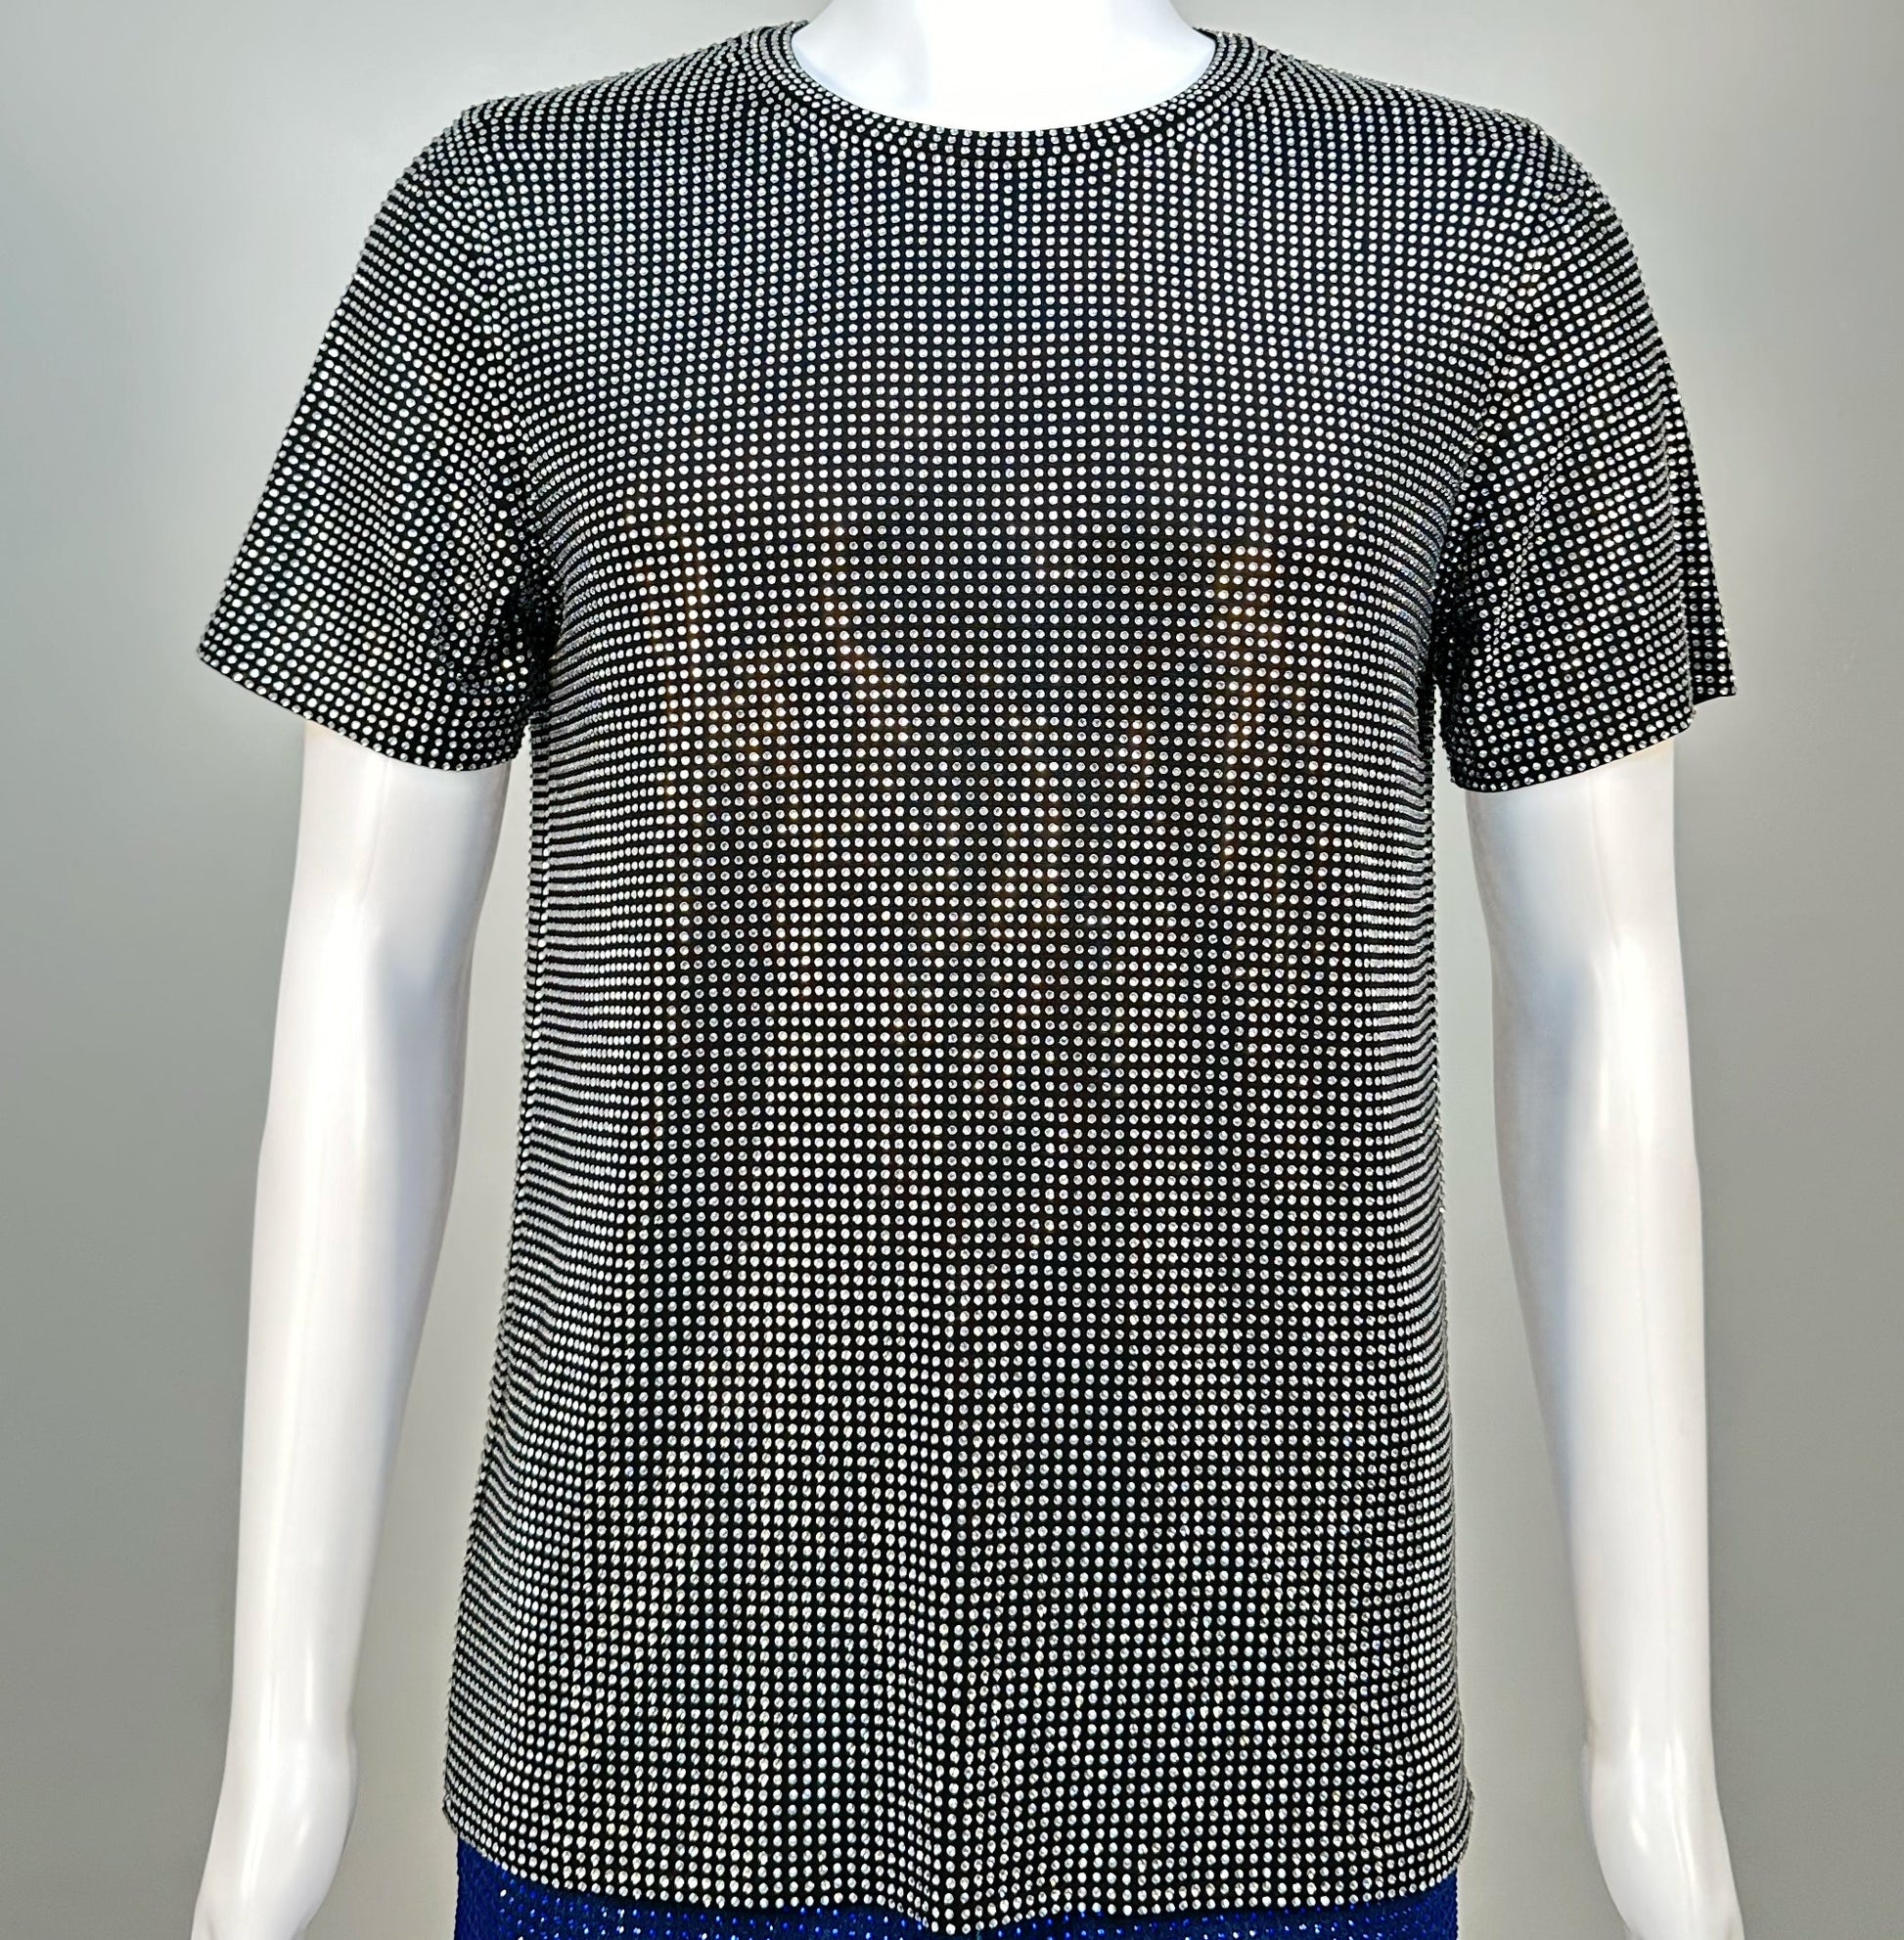 Photo of a sparkling Clear Crystals on Black Fabric T-shirt featuring thousands of crystal rhinestones.